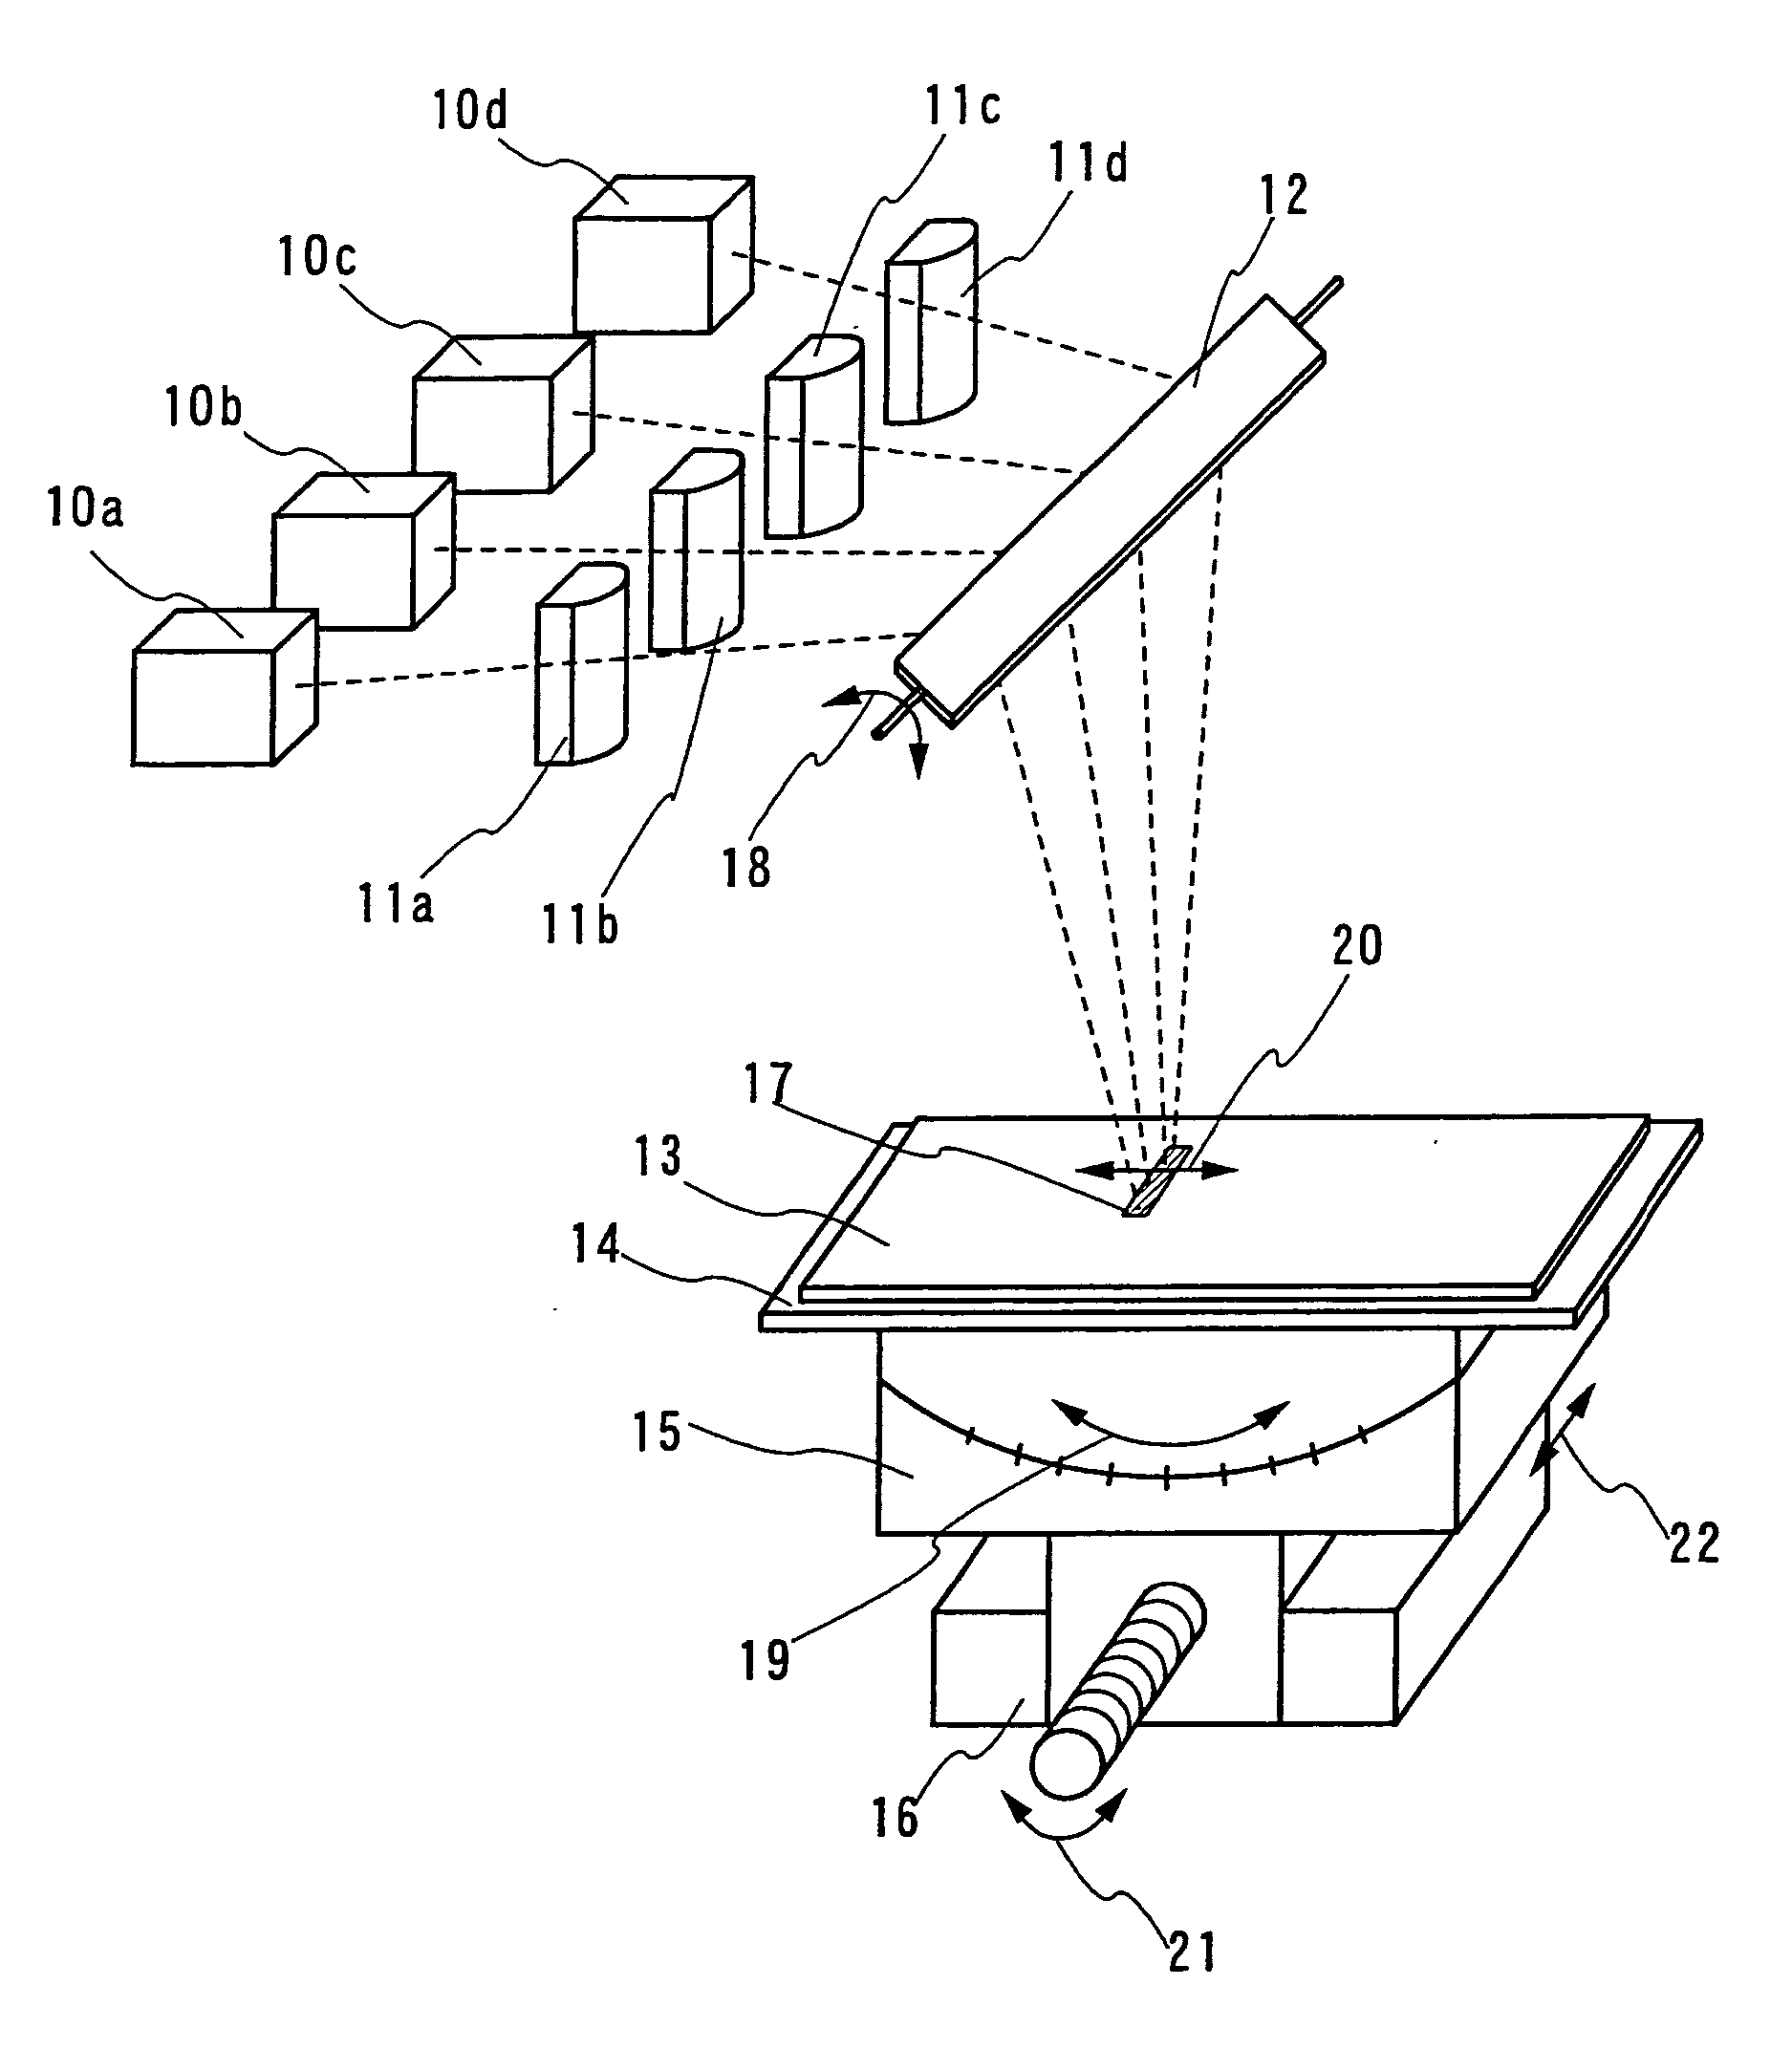 Laser beam irradiating apparatus, laser beam irradiating method, and method of manufacturing a semiconductor device